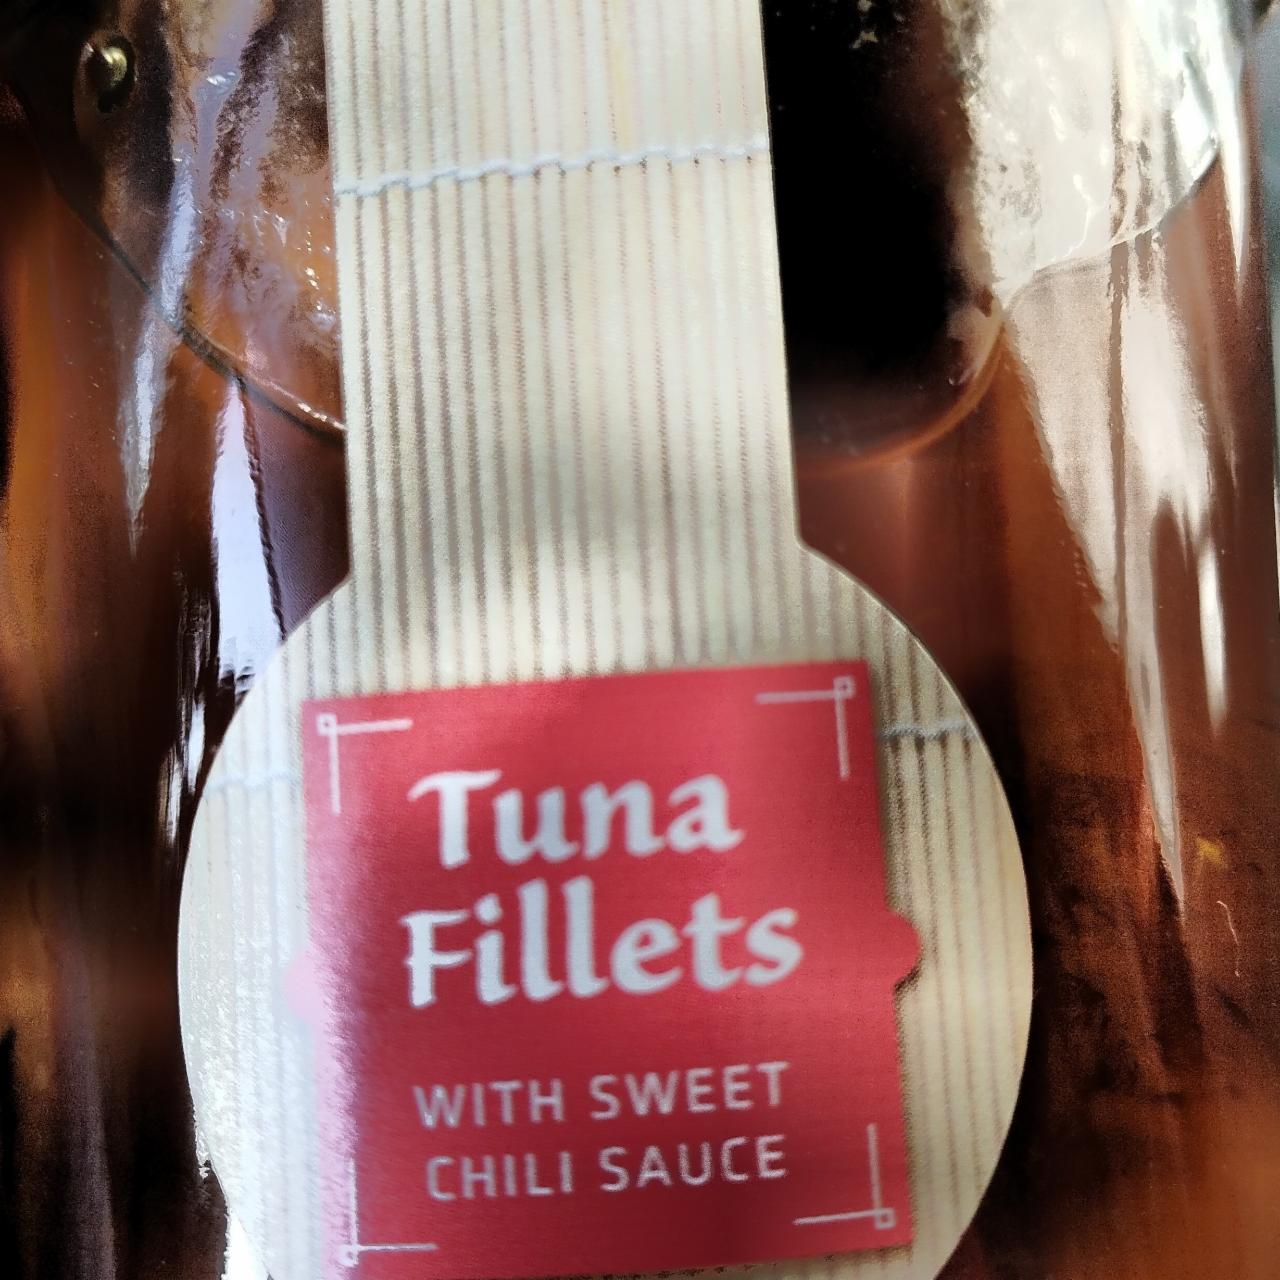 Fotografie - Tuna fillets with sweet chili sauce Lidl